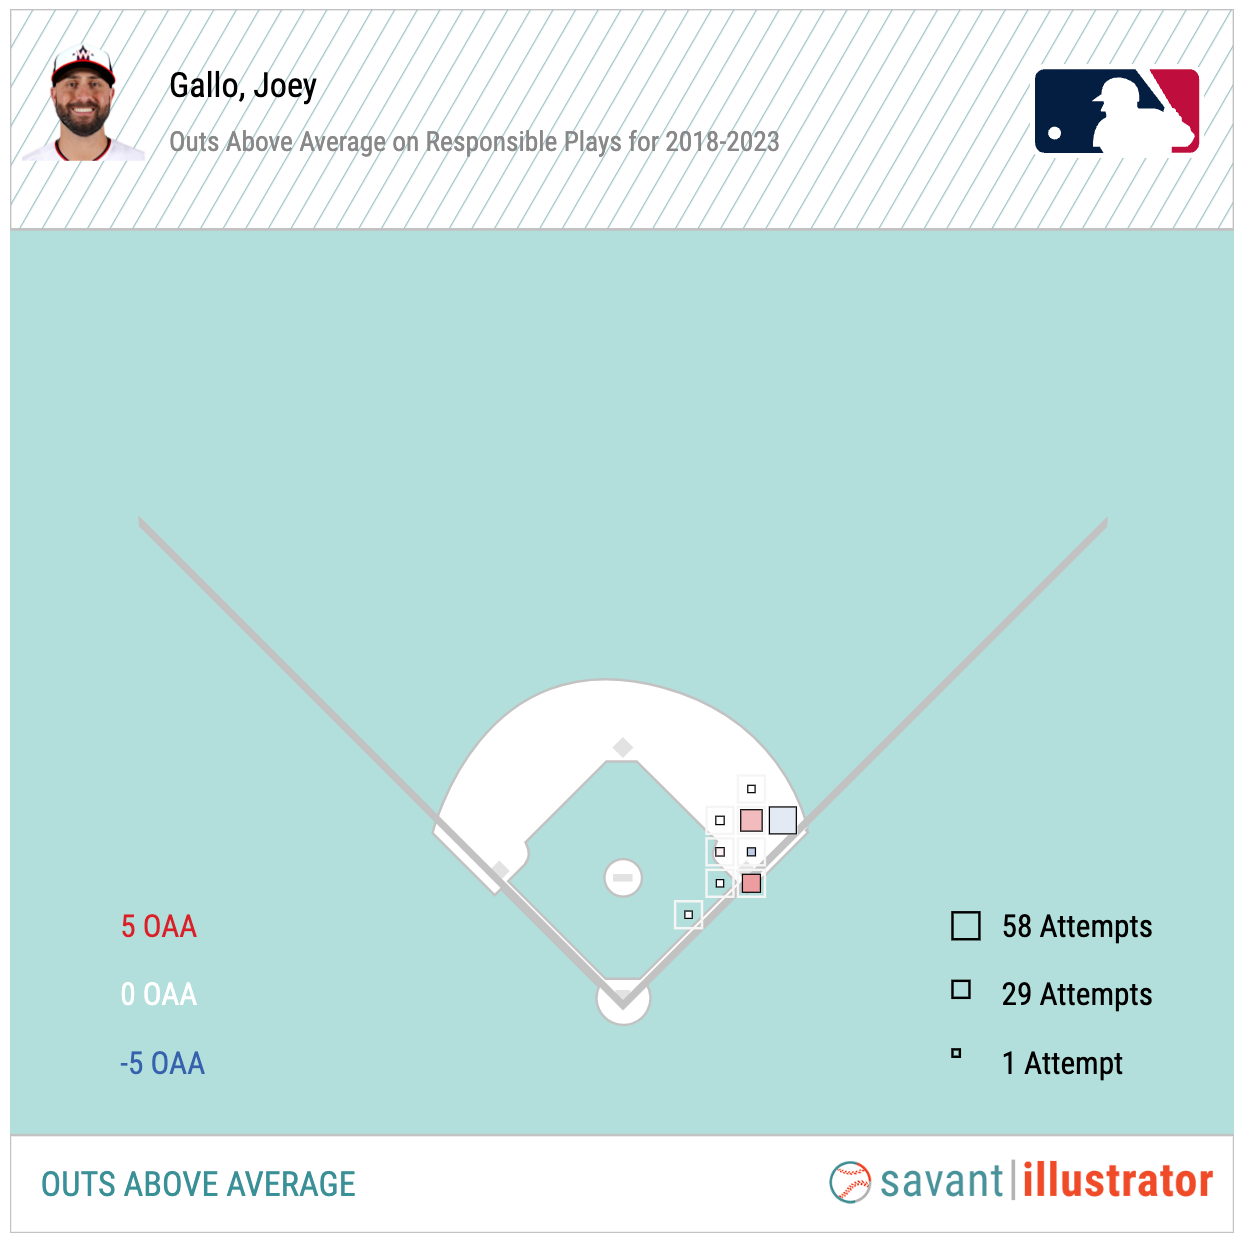 Joey Gallo's first-base OAA in his career